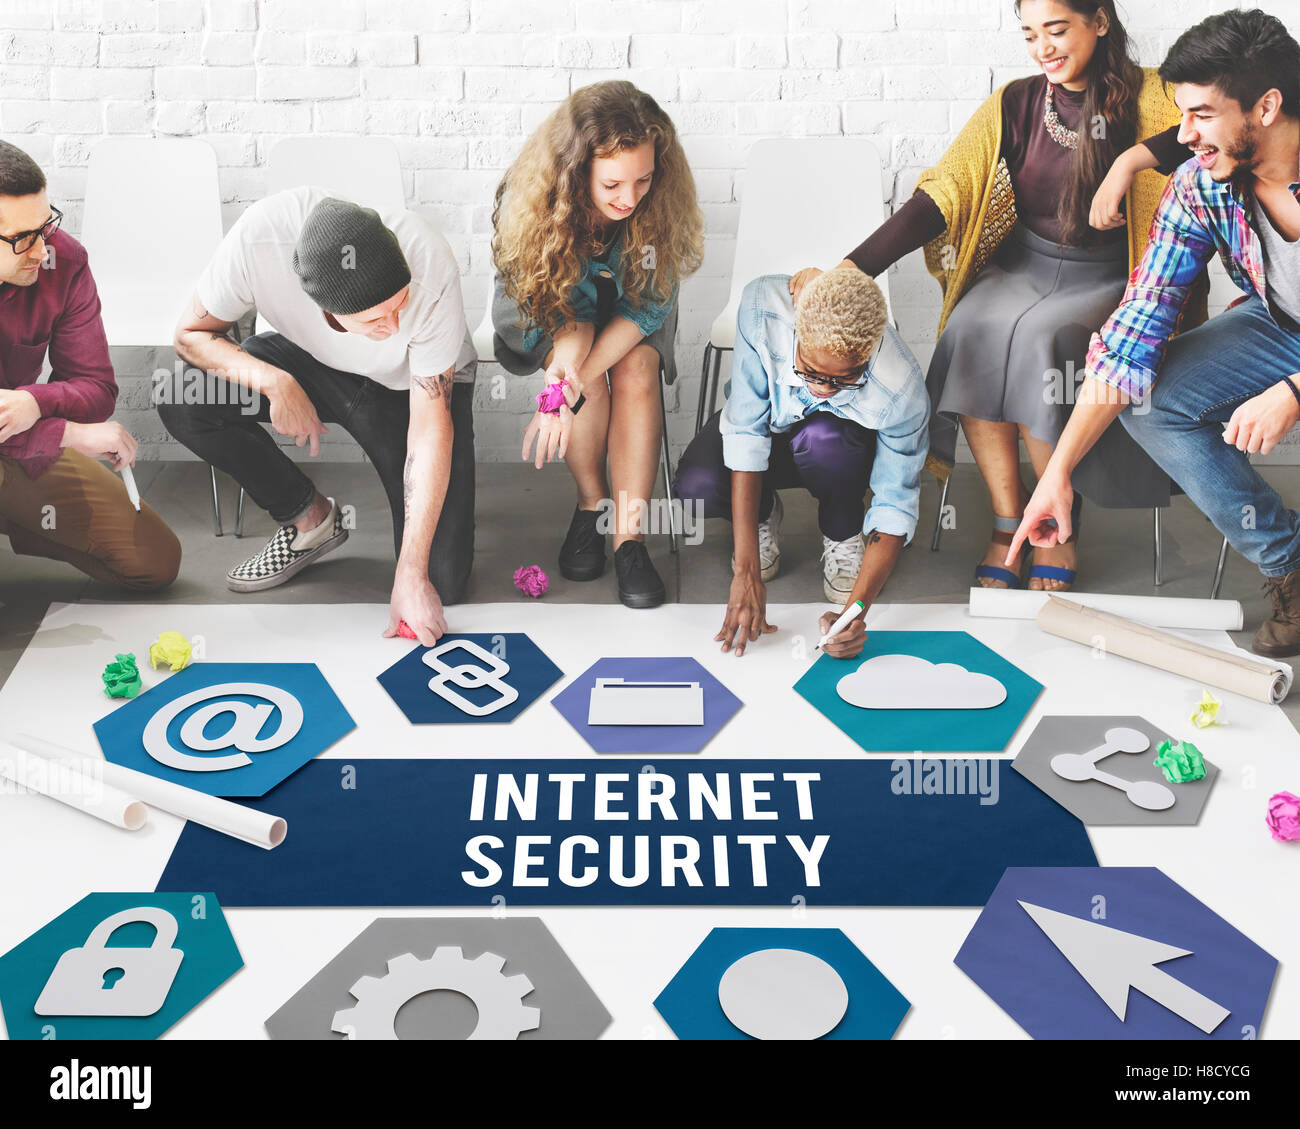 Internet Security Protection Safety Concept Stock Photo